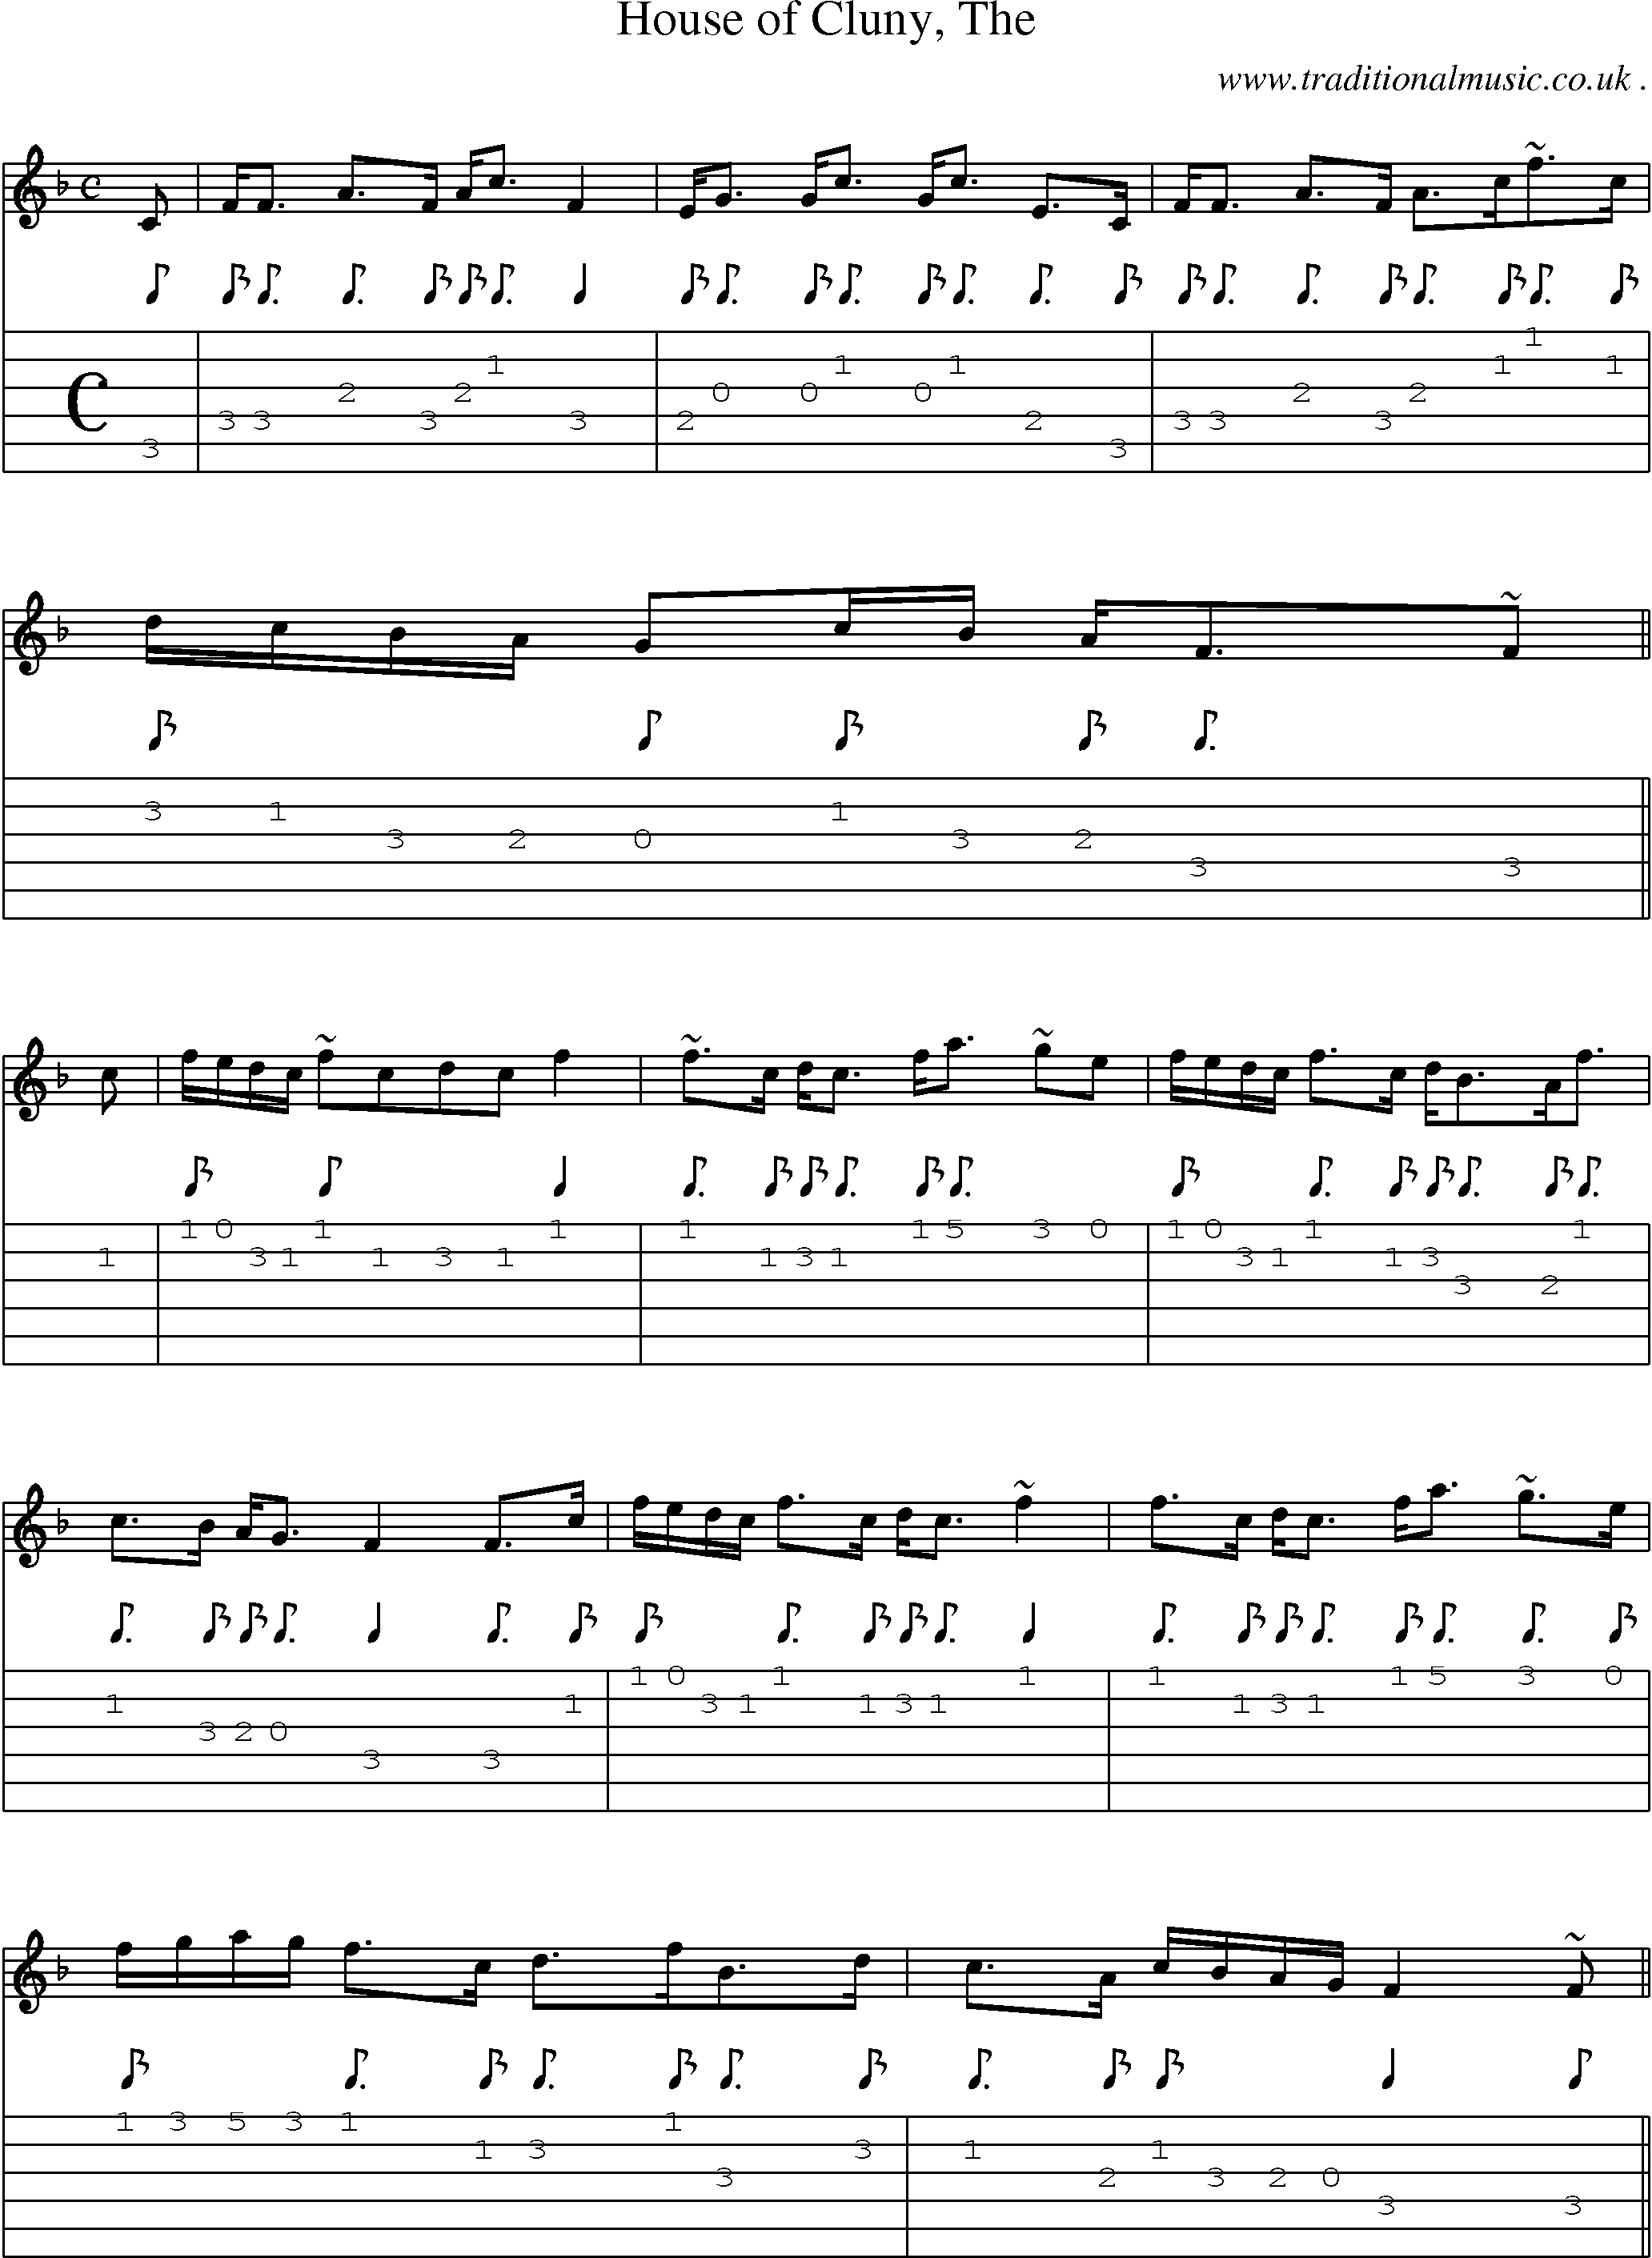 Sheet-music  score, Chords and Guitar Tabs for House Of Cluny The